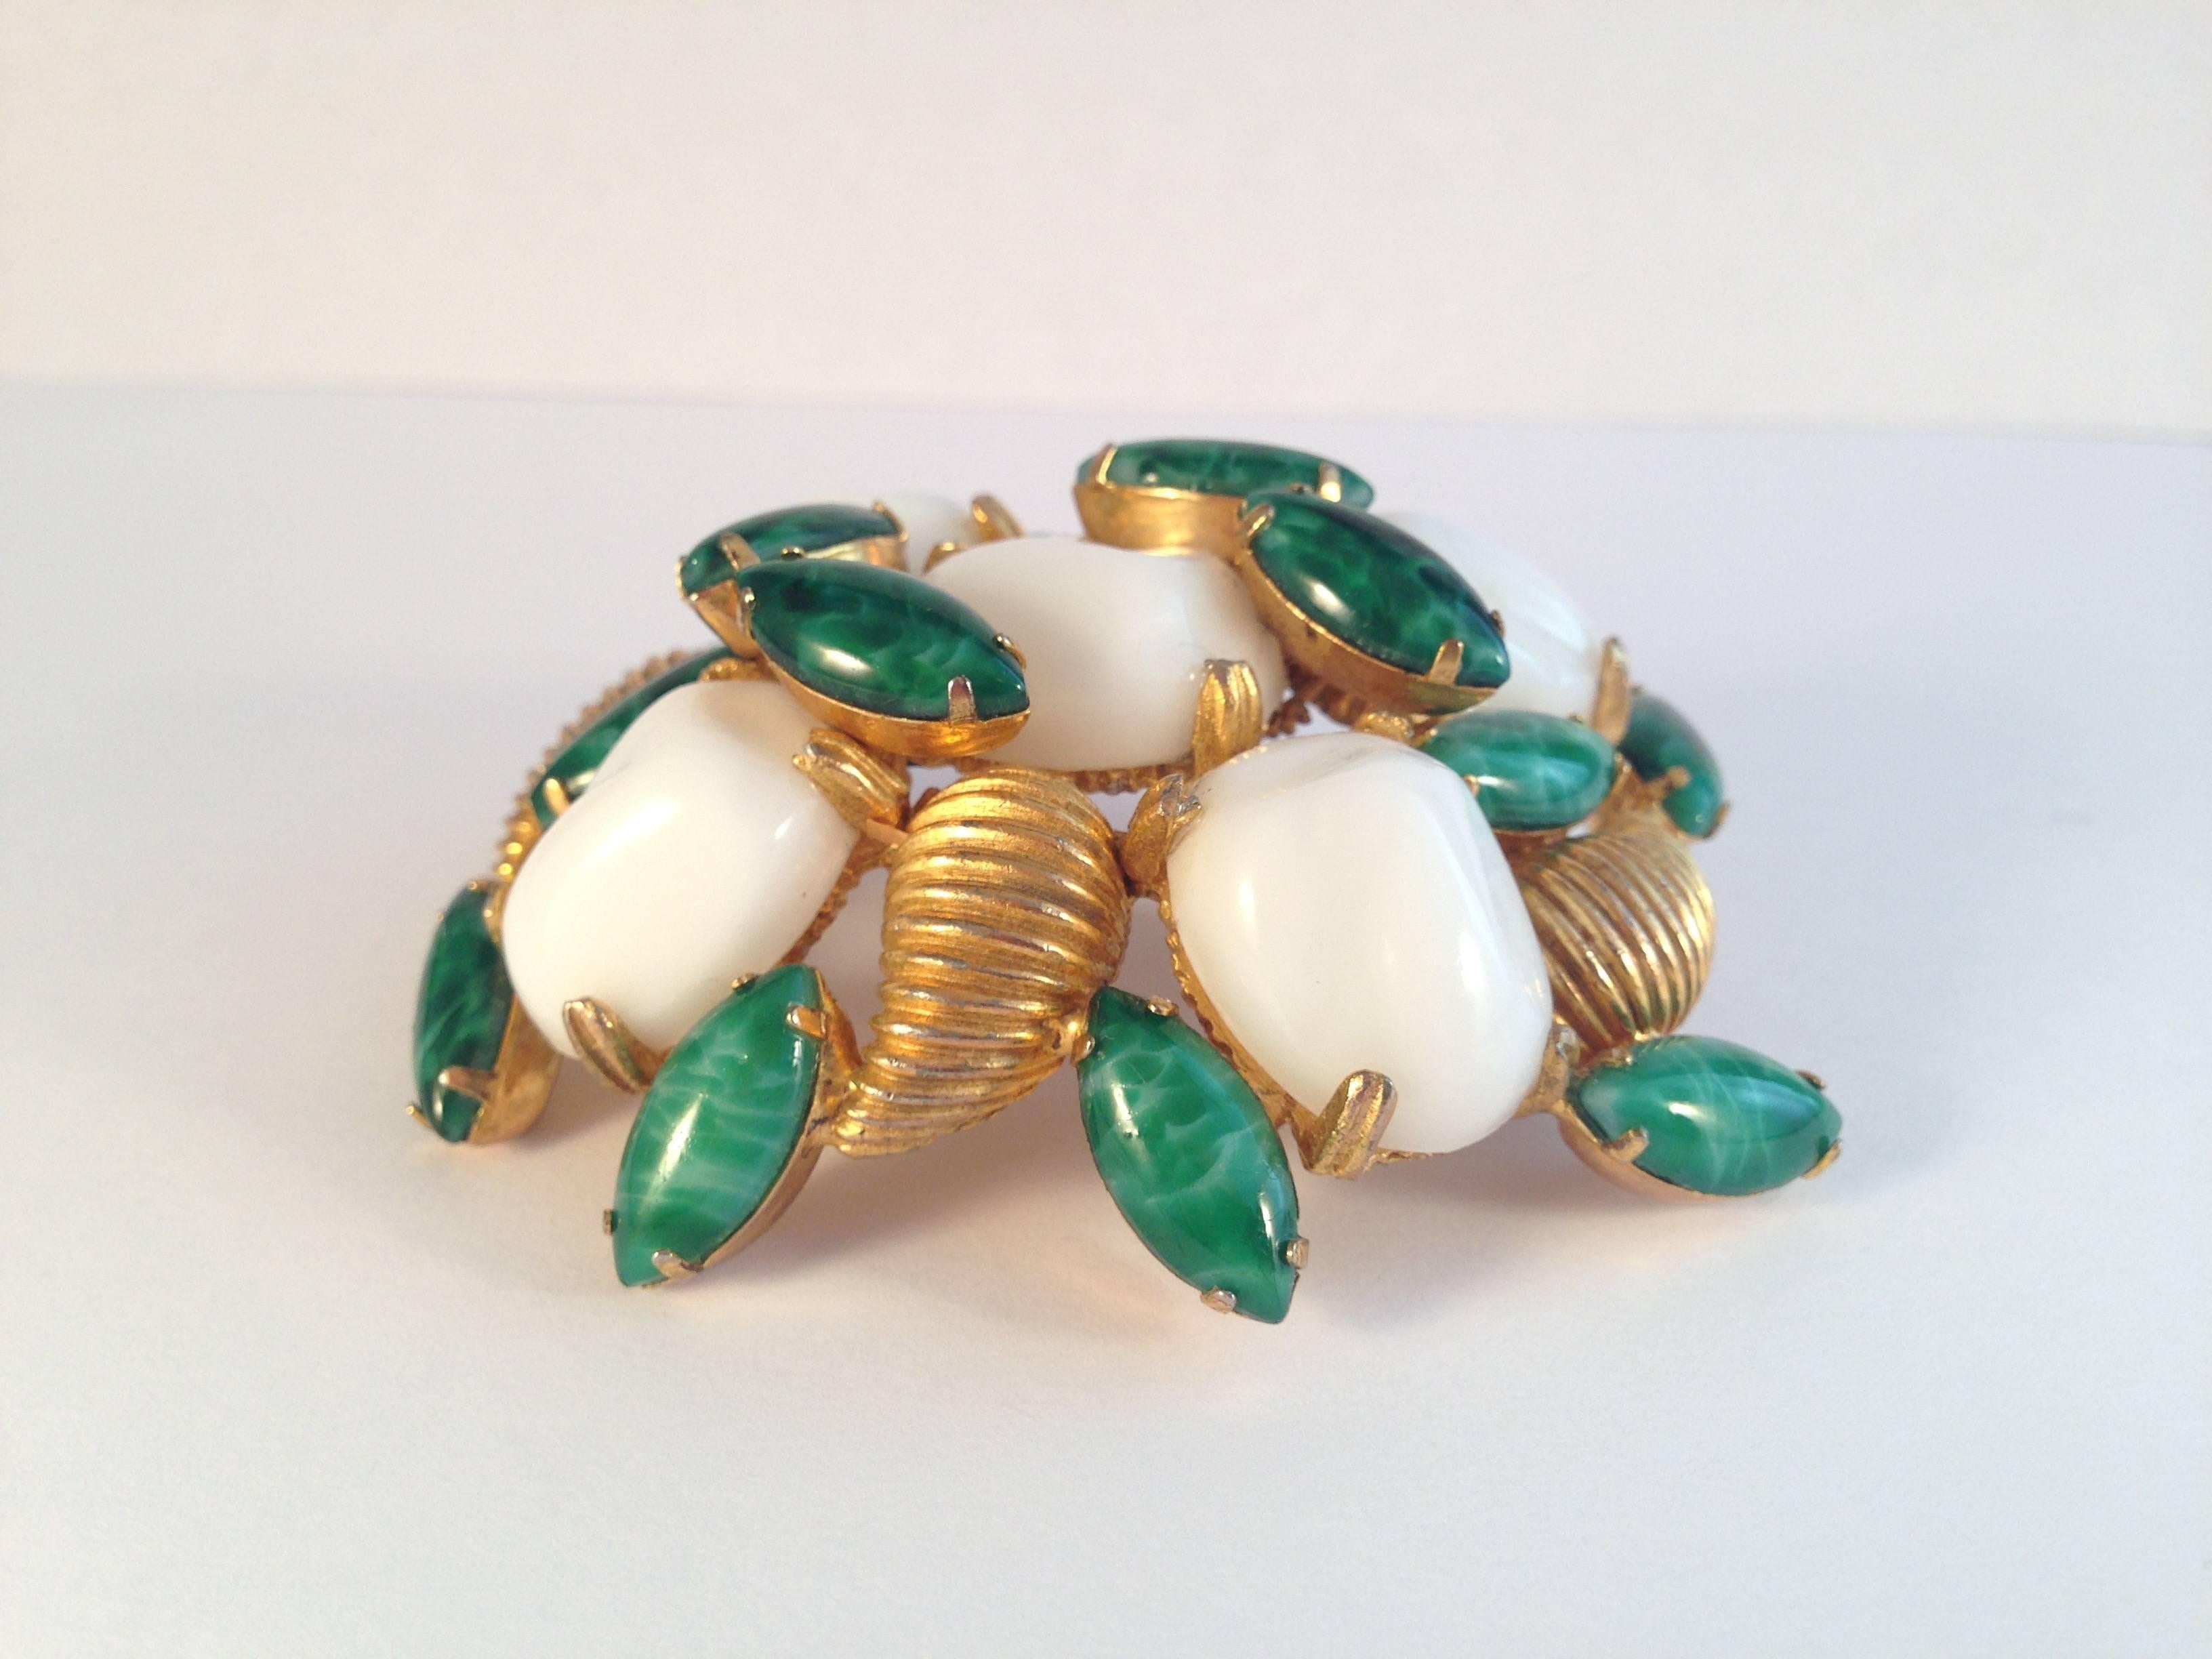 This is a 1960s Mimi di N gold tone brooch set with white and green glass cabochons. It is large and measures 2 1/2" wide x 2 1/8" high. It is marked 'Mimi di N' in an oval plaque on the back of the brooch. It is in excellent vintage